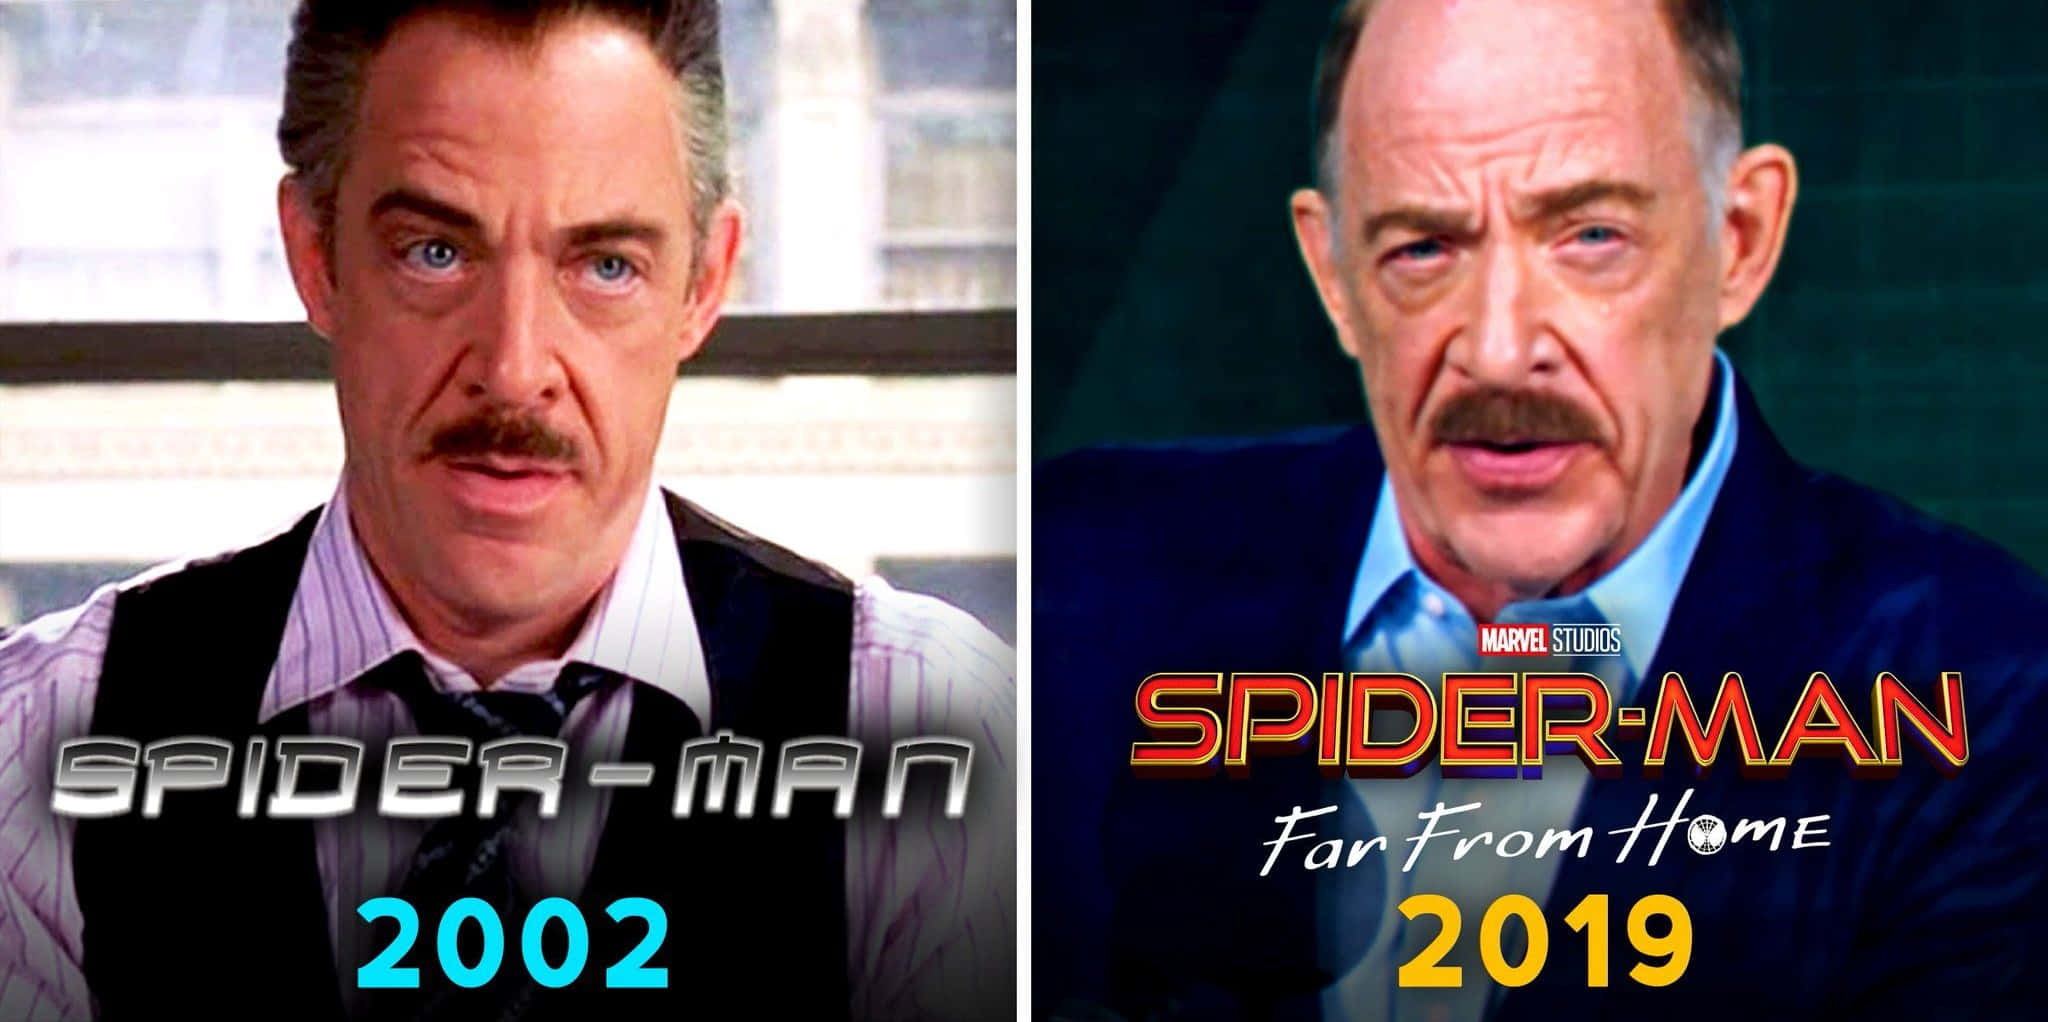 J. Jonah Jameson, Editor-in-chief of the Daily Bugle Wallpaper